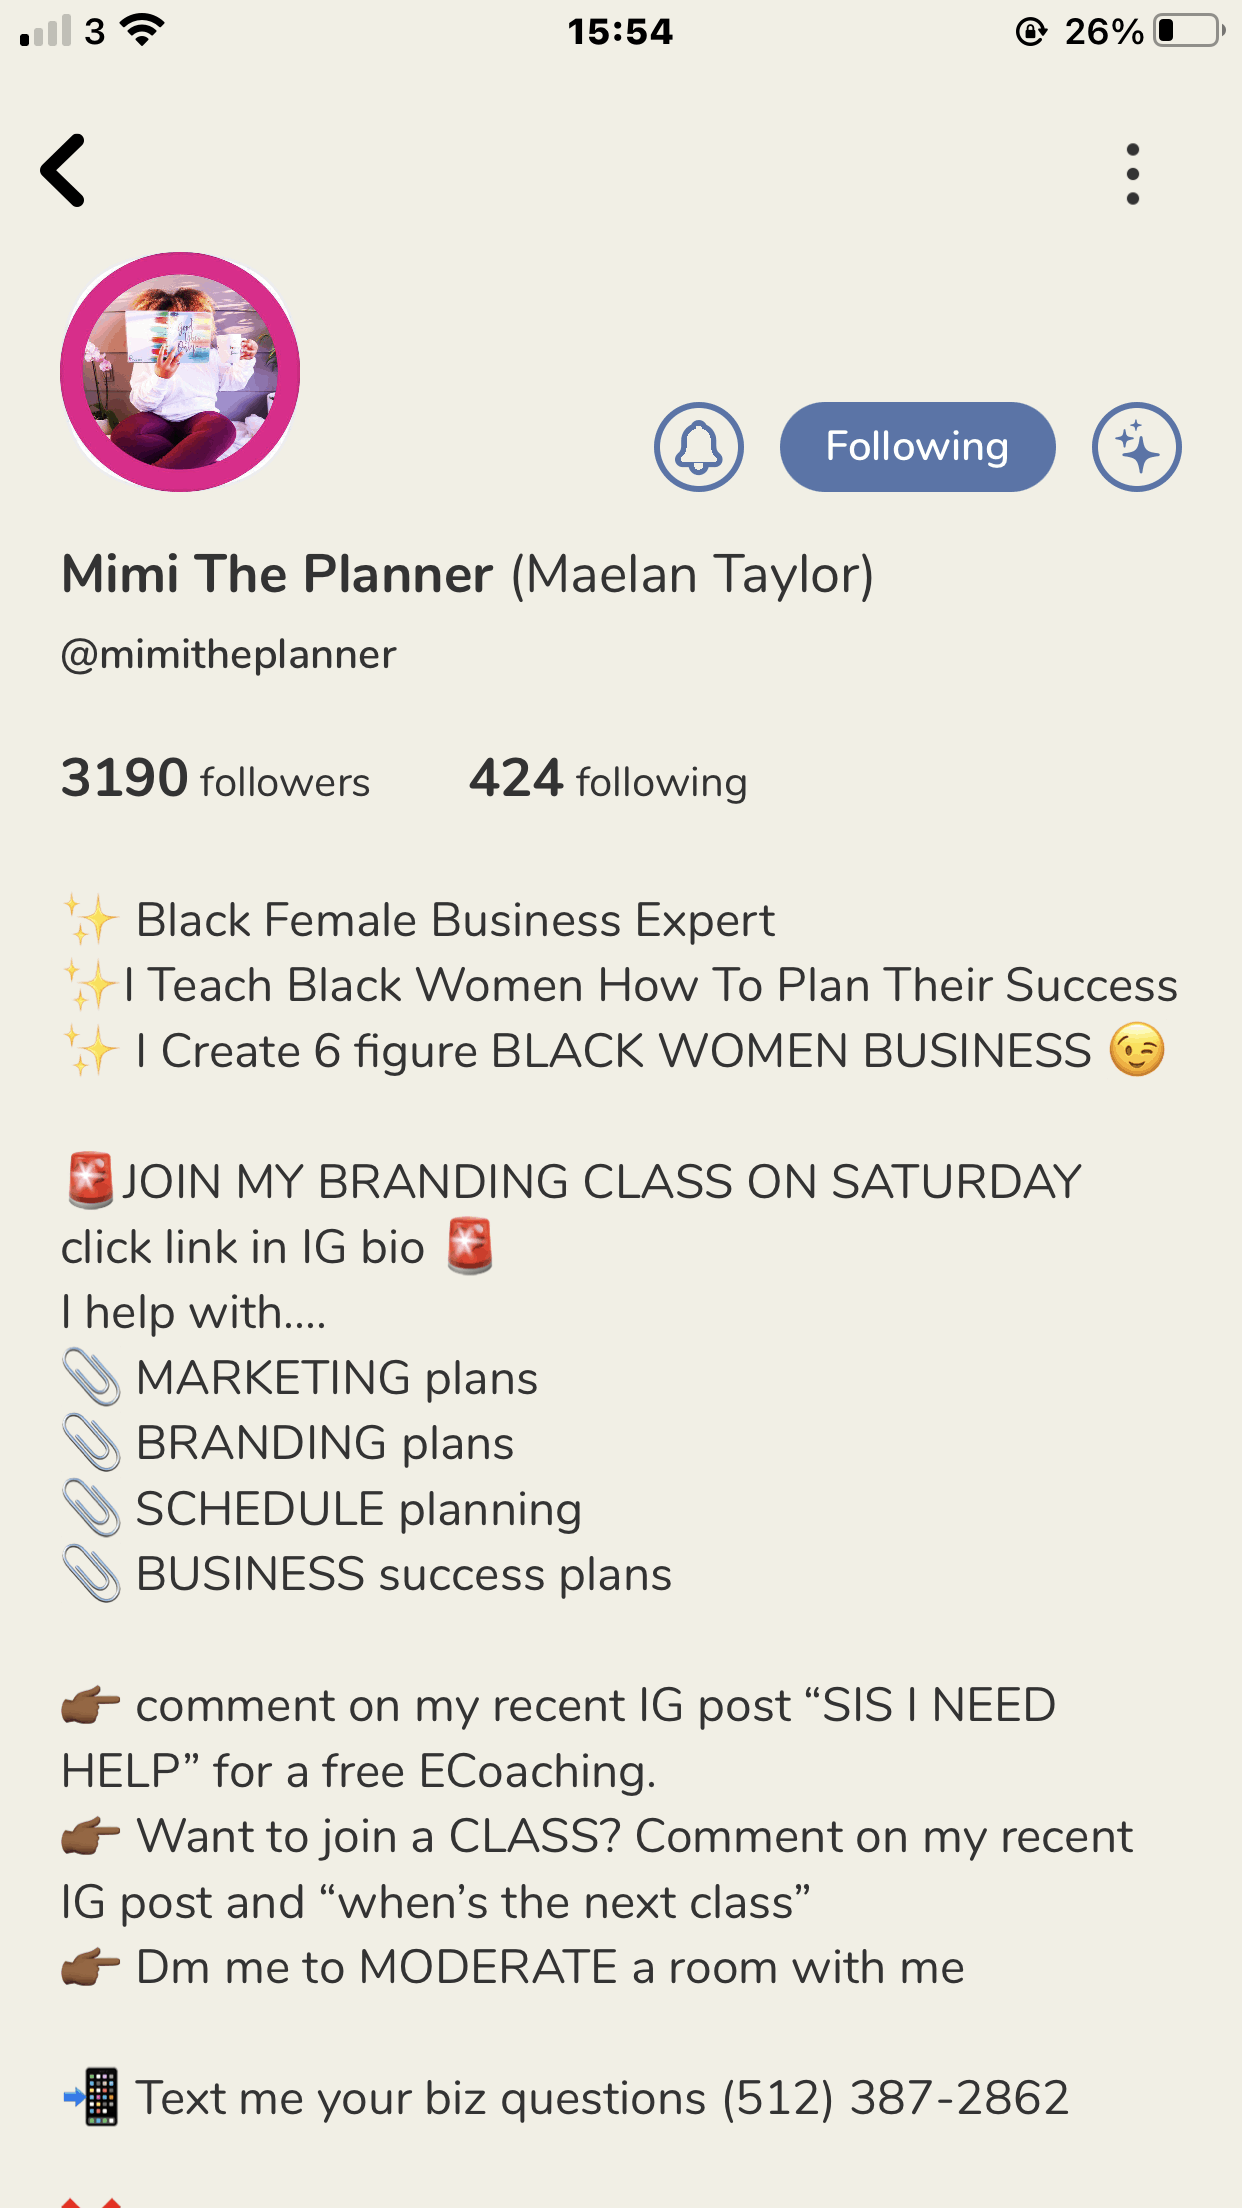 Mimi the Planner